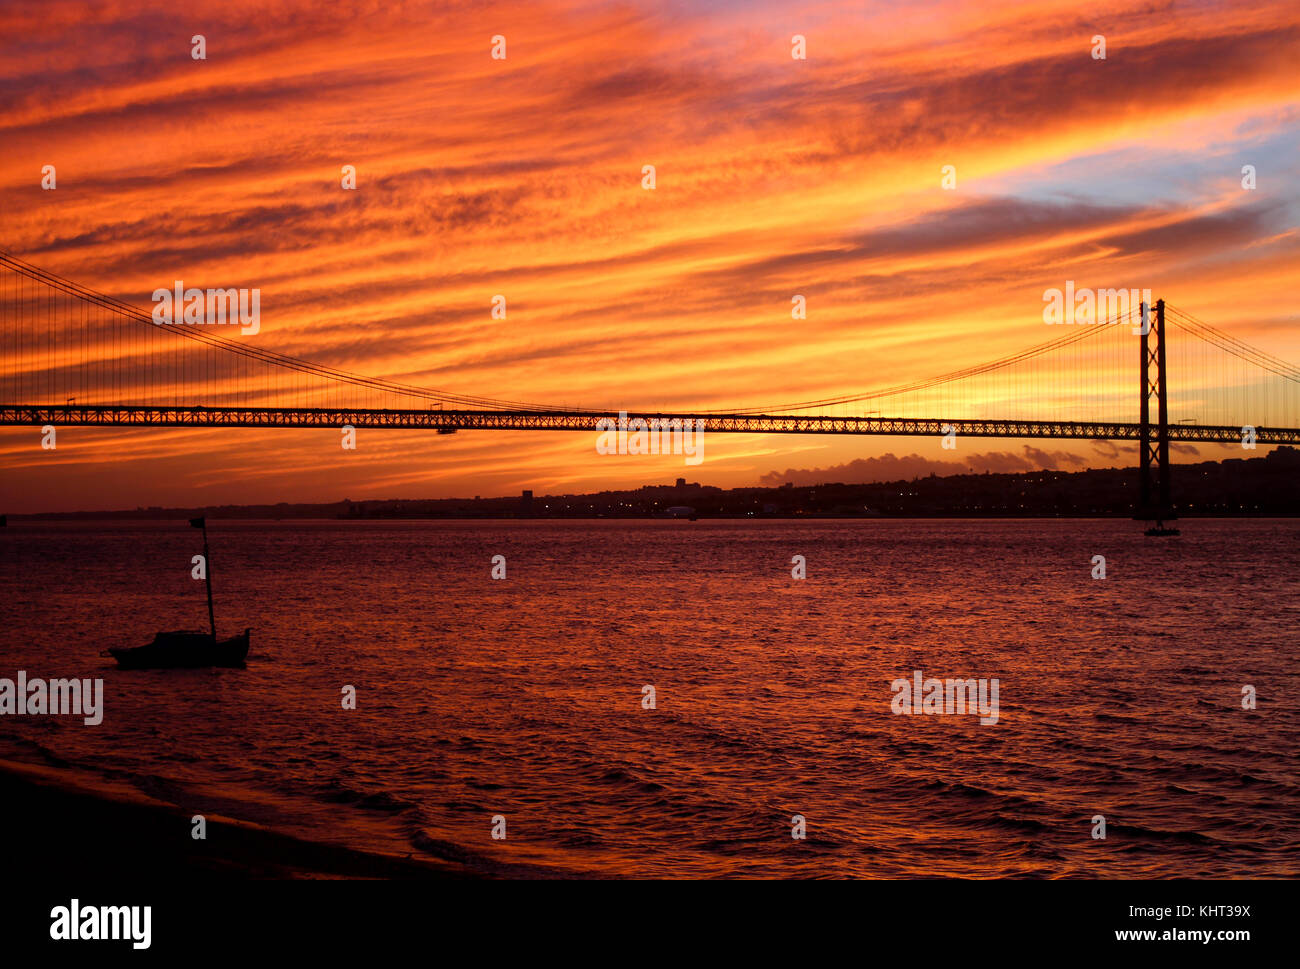 A blazing red sunset over the Tagus River. Lisbon, Portugal. Stock Photo